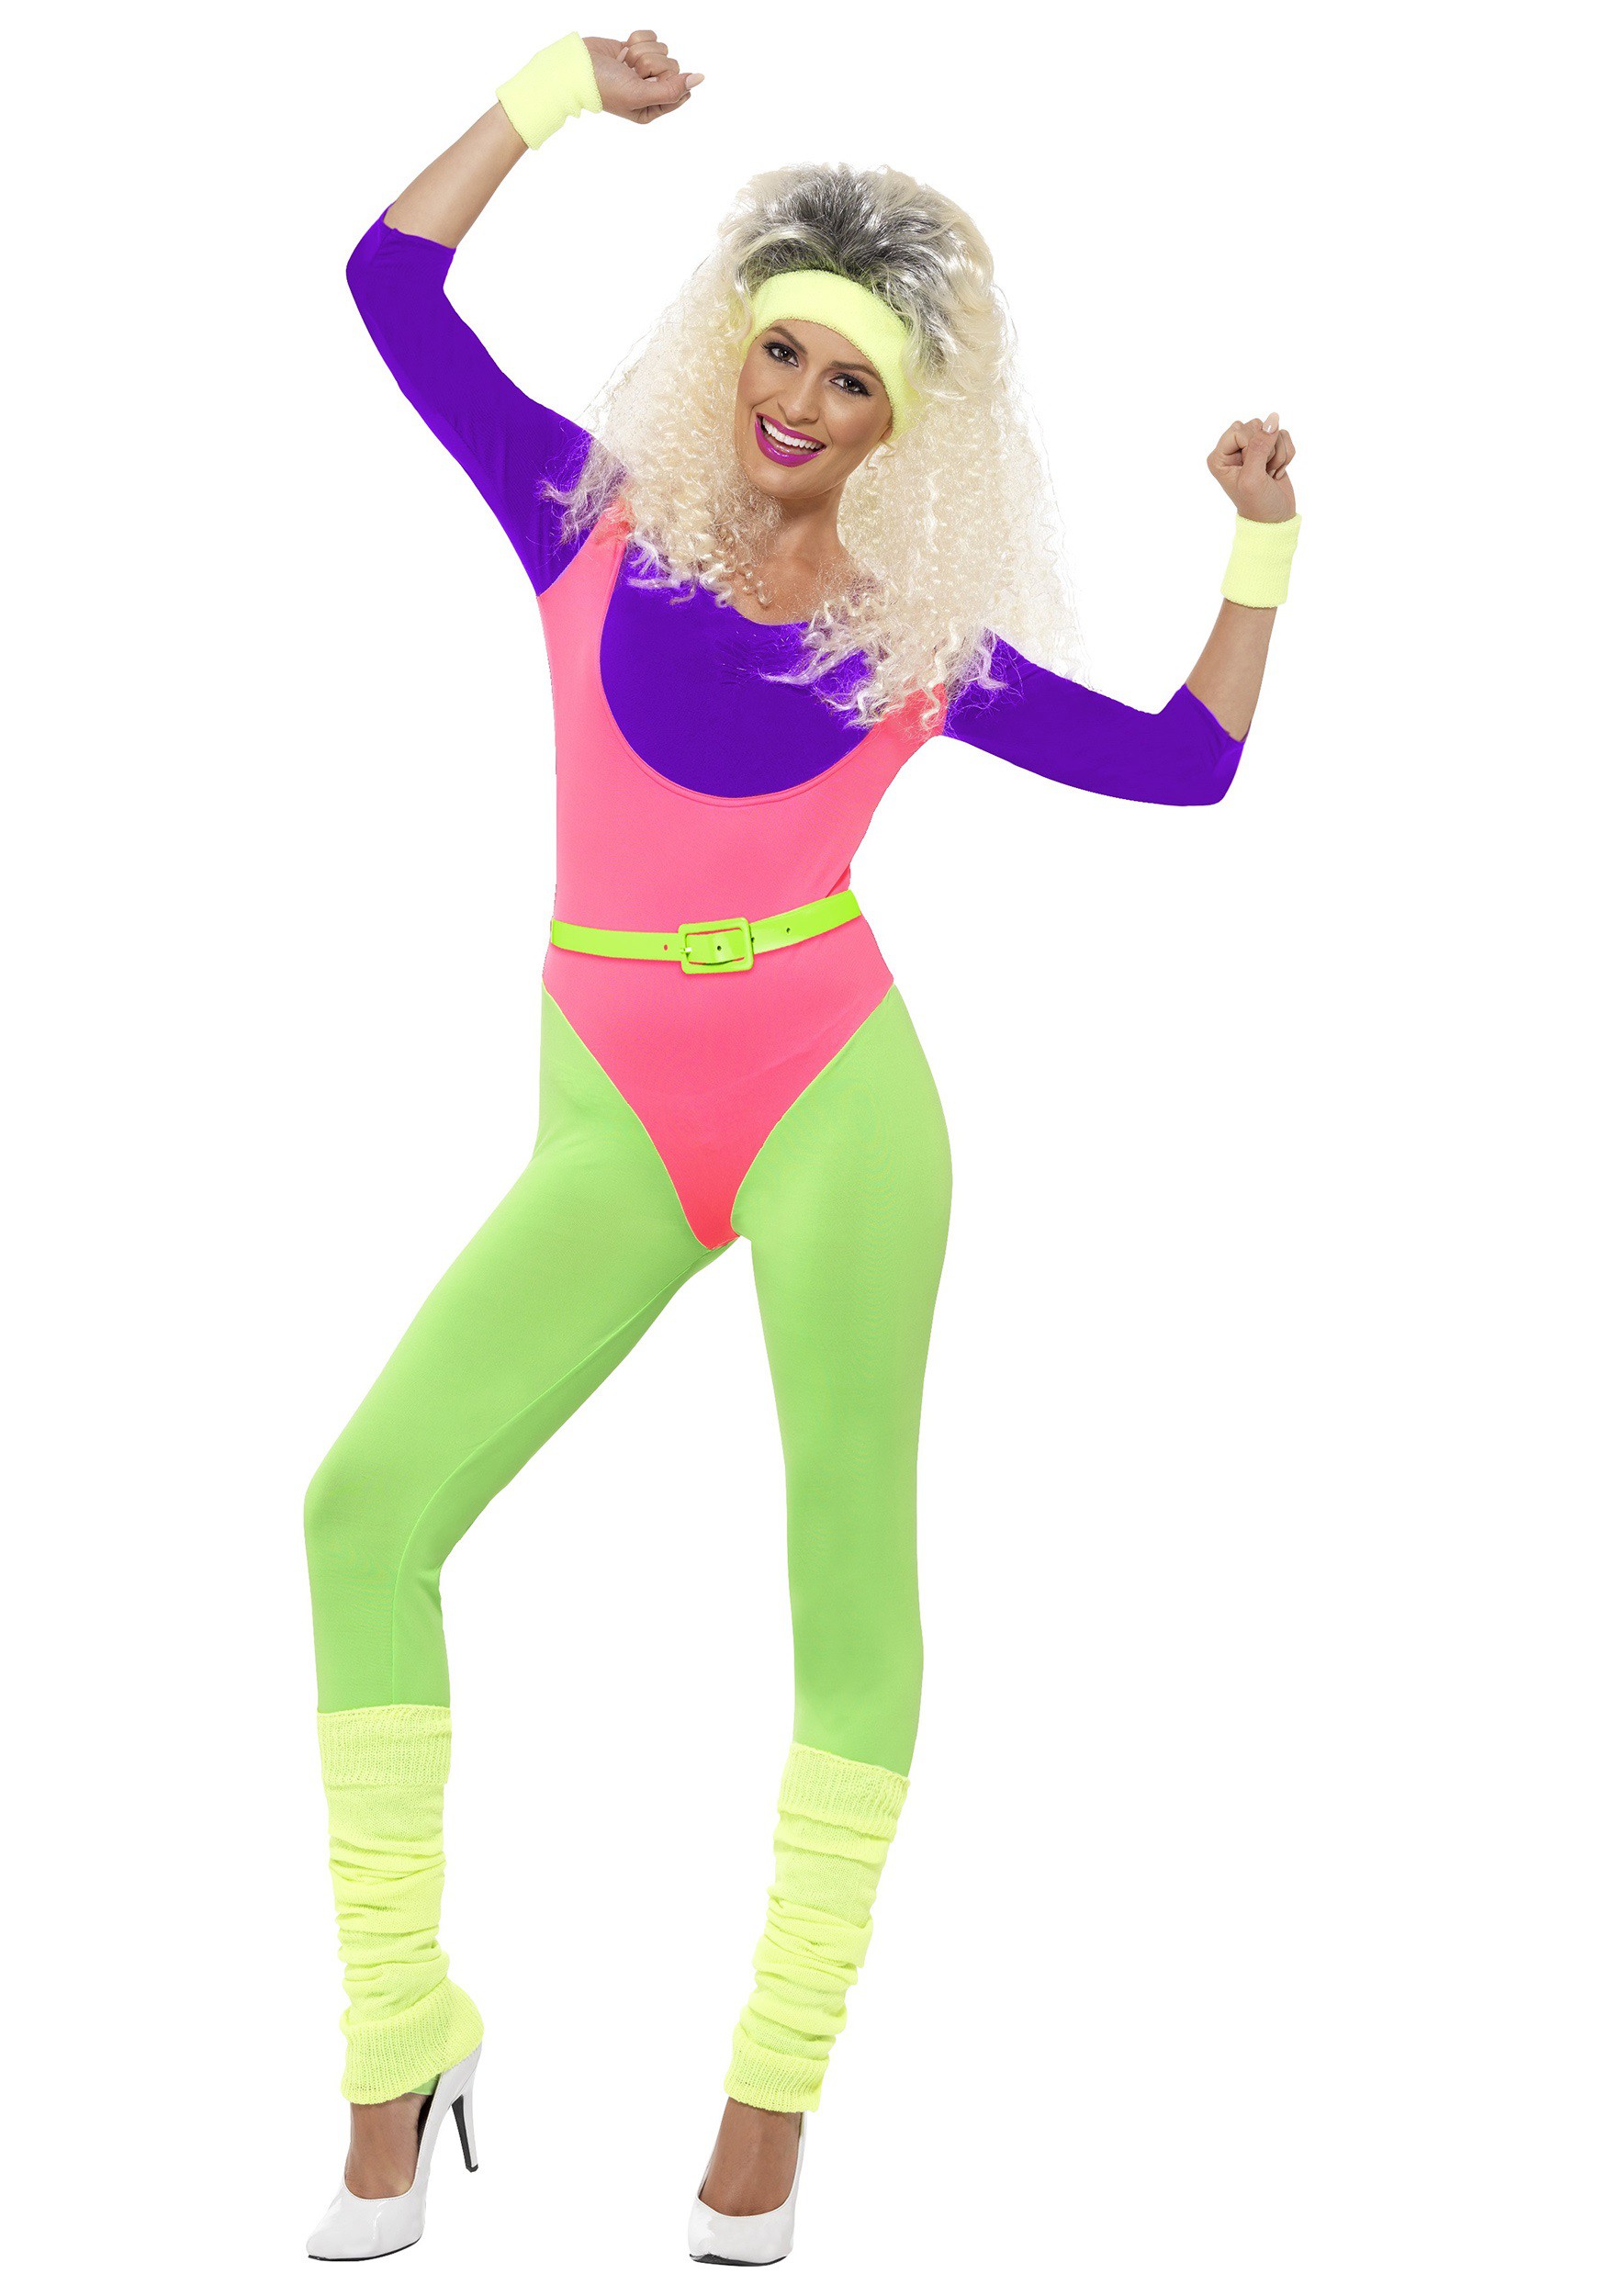 https://images.fun.com/products/31383/1-1/womens-80s-workout-costume.jpg